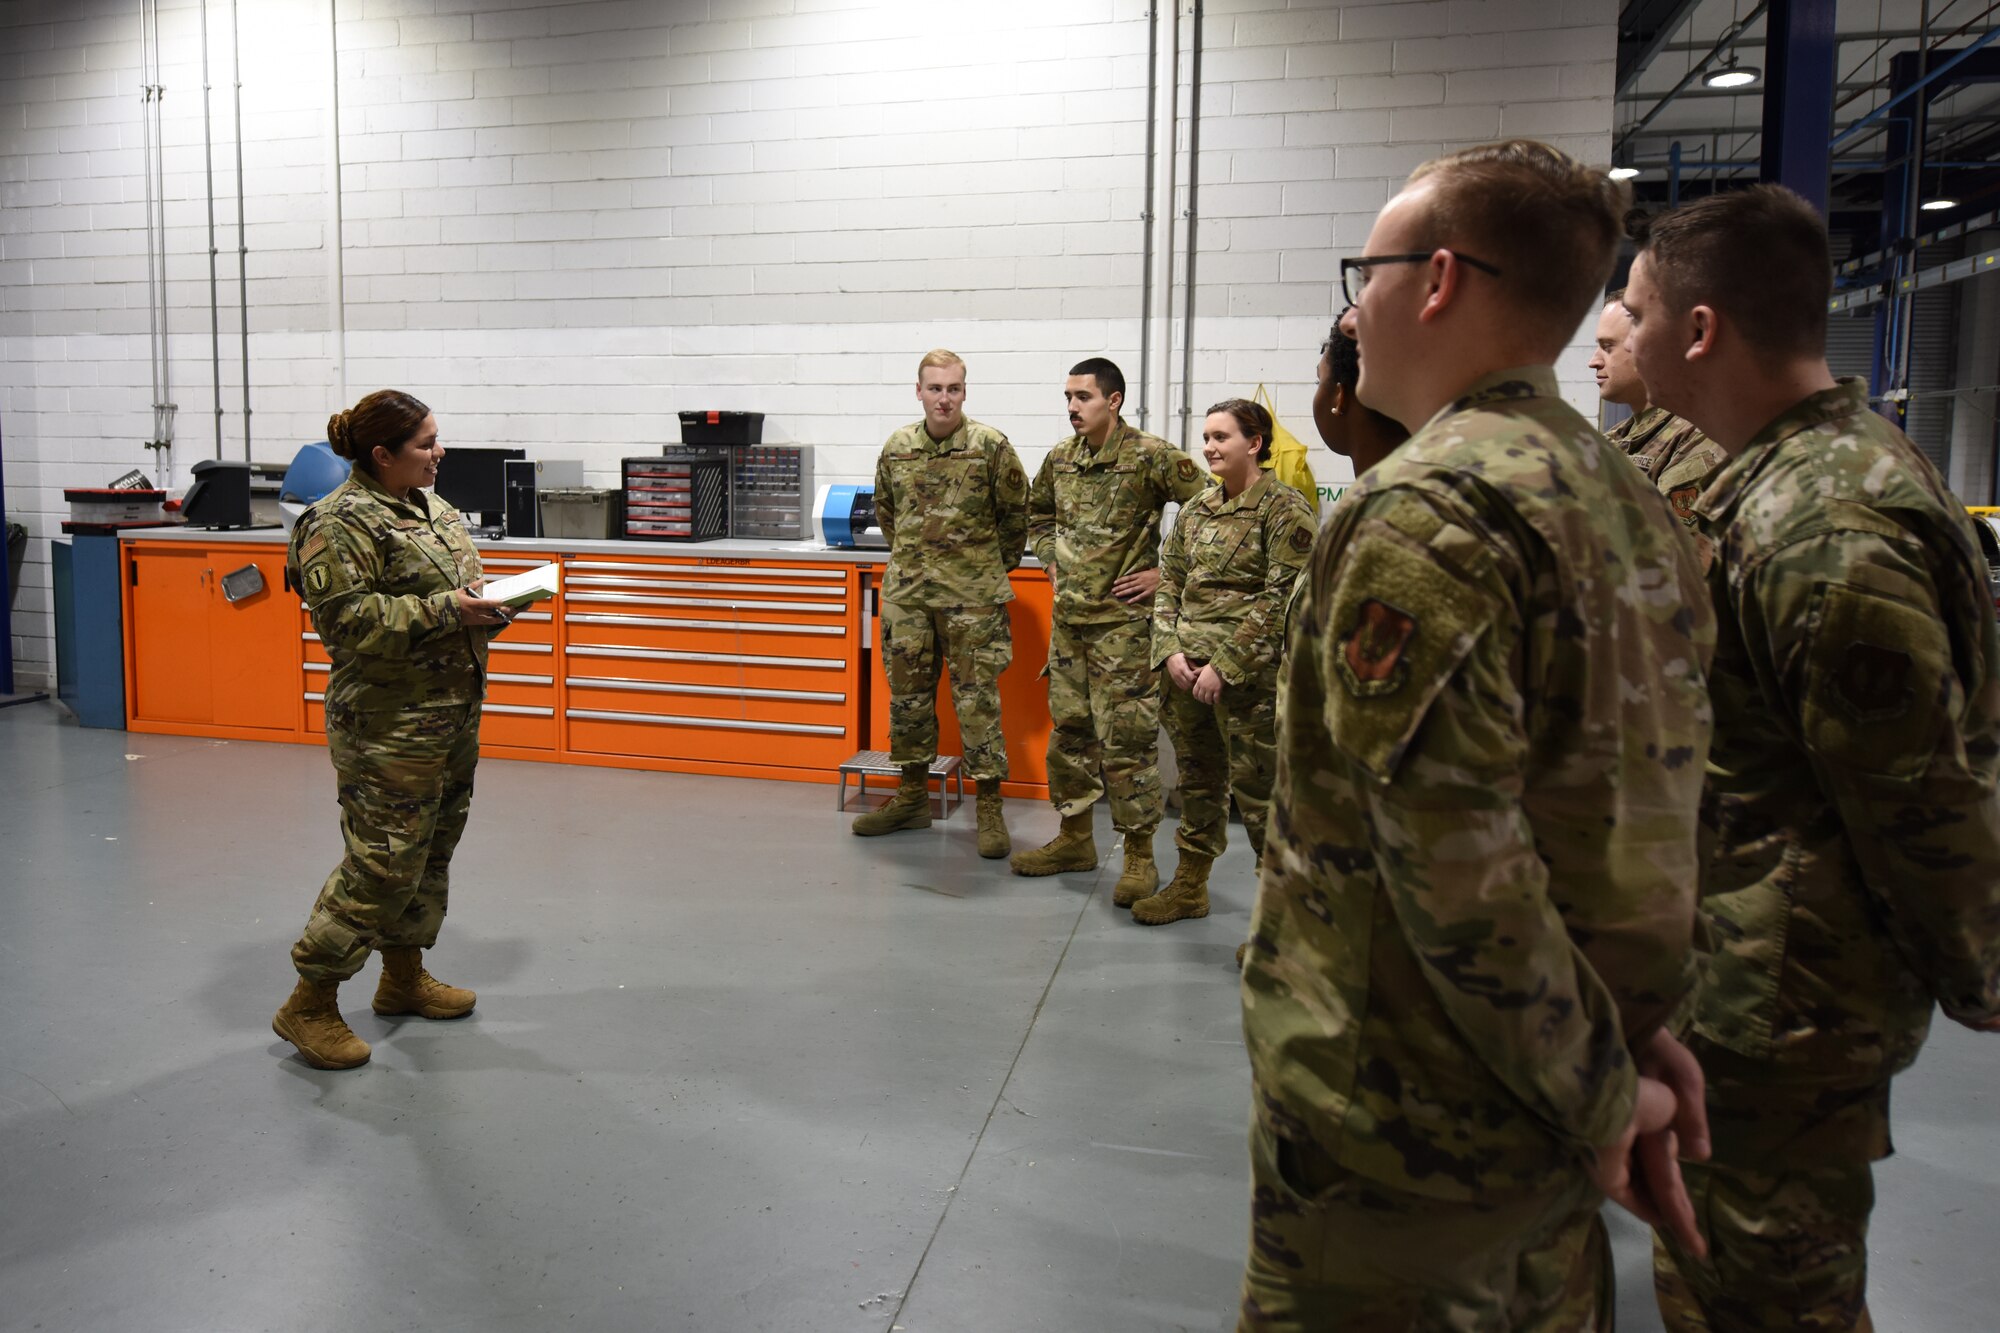 Tech. Sgt. Lorena Hodge, 48th Munitions Squadron armament support section chief, talks to her troops during an afternoon meeting at Royal Air Force Lakenheath, England, Oct. 11, 2019. Hodge was preparing for deployment and wanted to connect with her team before her departure. (U.S. Air Force photo by Airman 1st Class Jessi L. Monte)